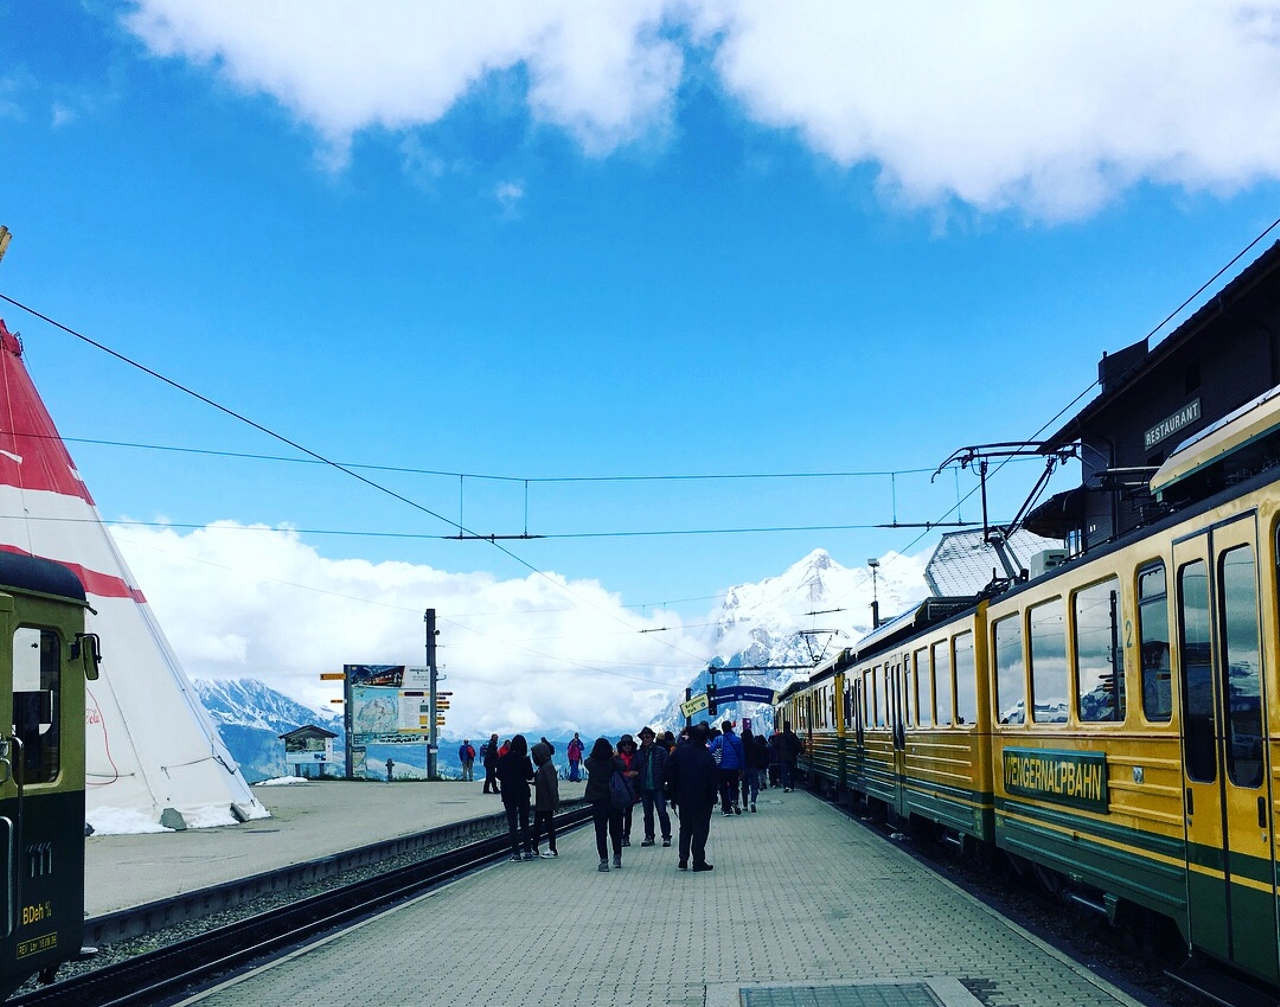 Jungfraujoch Station is the Highest Railway Station in Europe